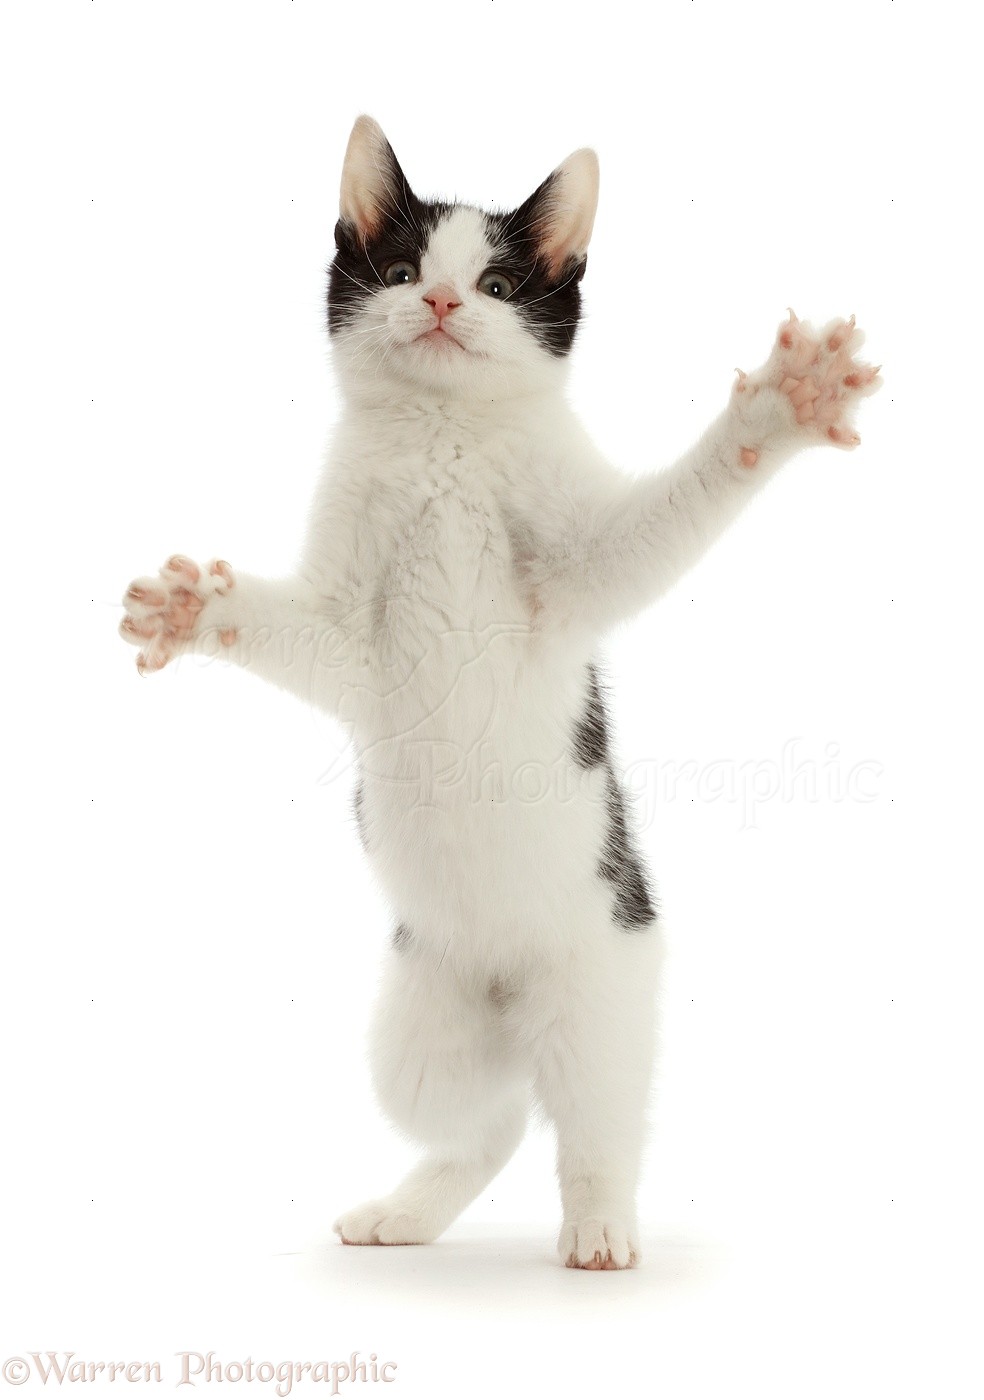 Black-and-white kitten standing up on hind legs and reaching photo WP48551